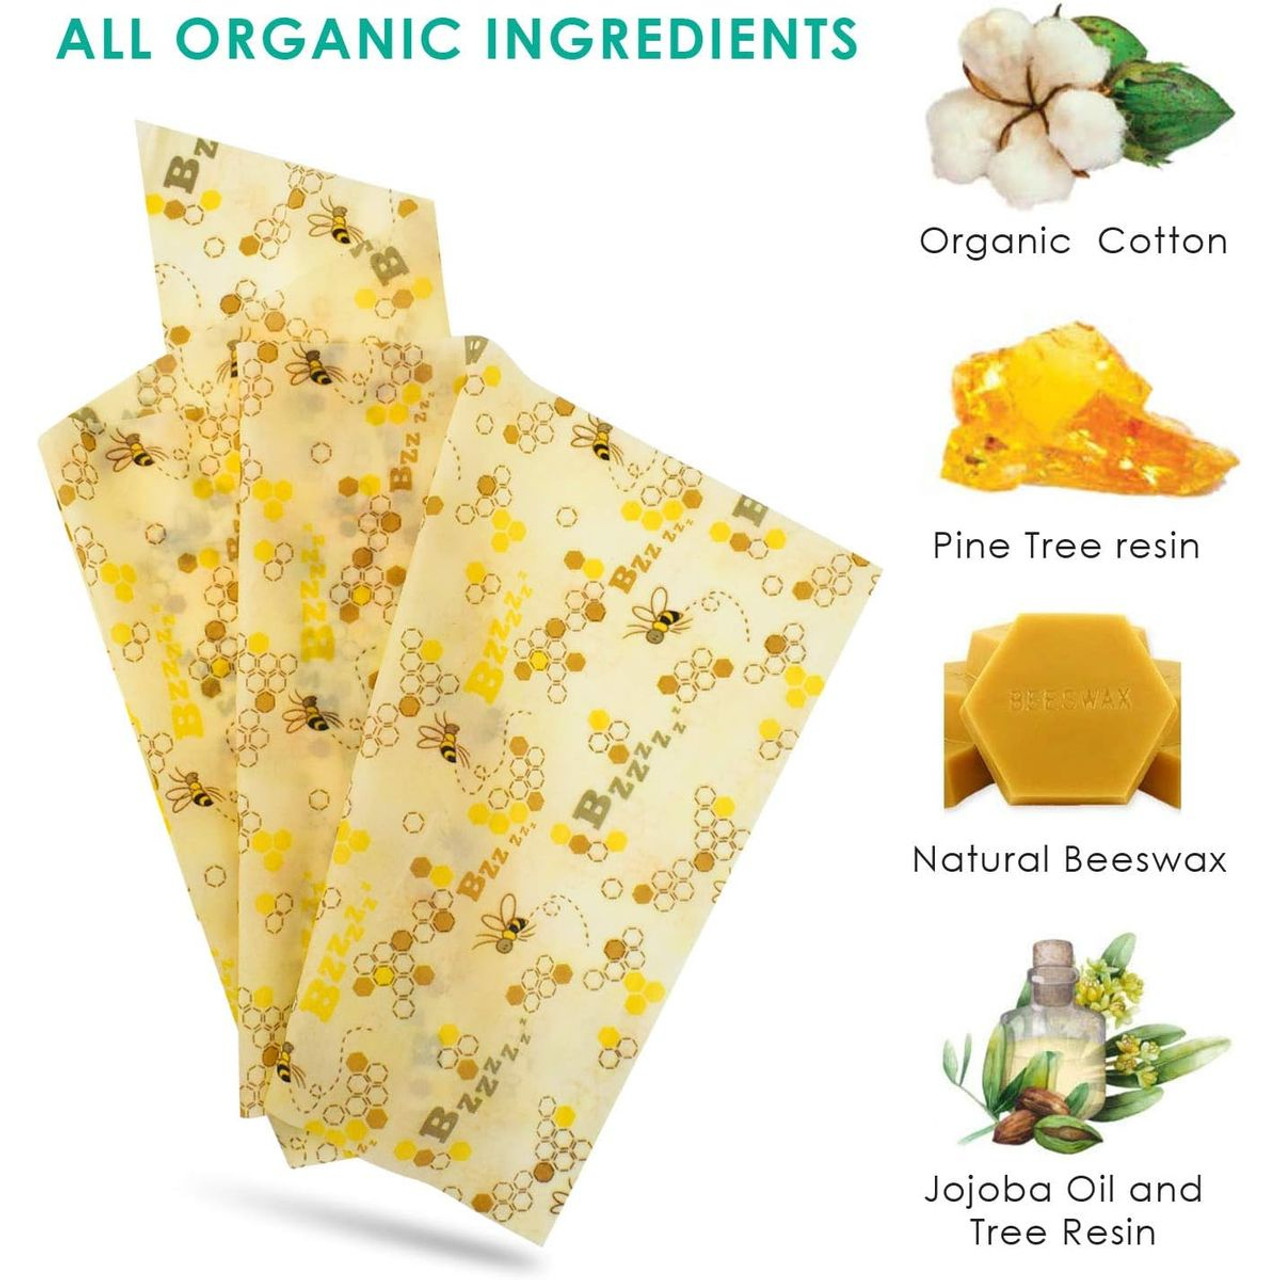 Honeycomb Pattern - Reusable Beeswax Food Wraps, Eco Friendly Beeswax Food Wrap, Sustainable Food Storage Containers,3 Pack (S, M, L) product image